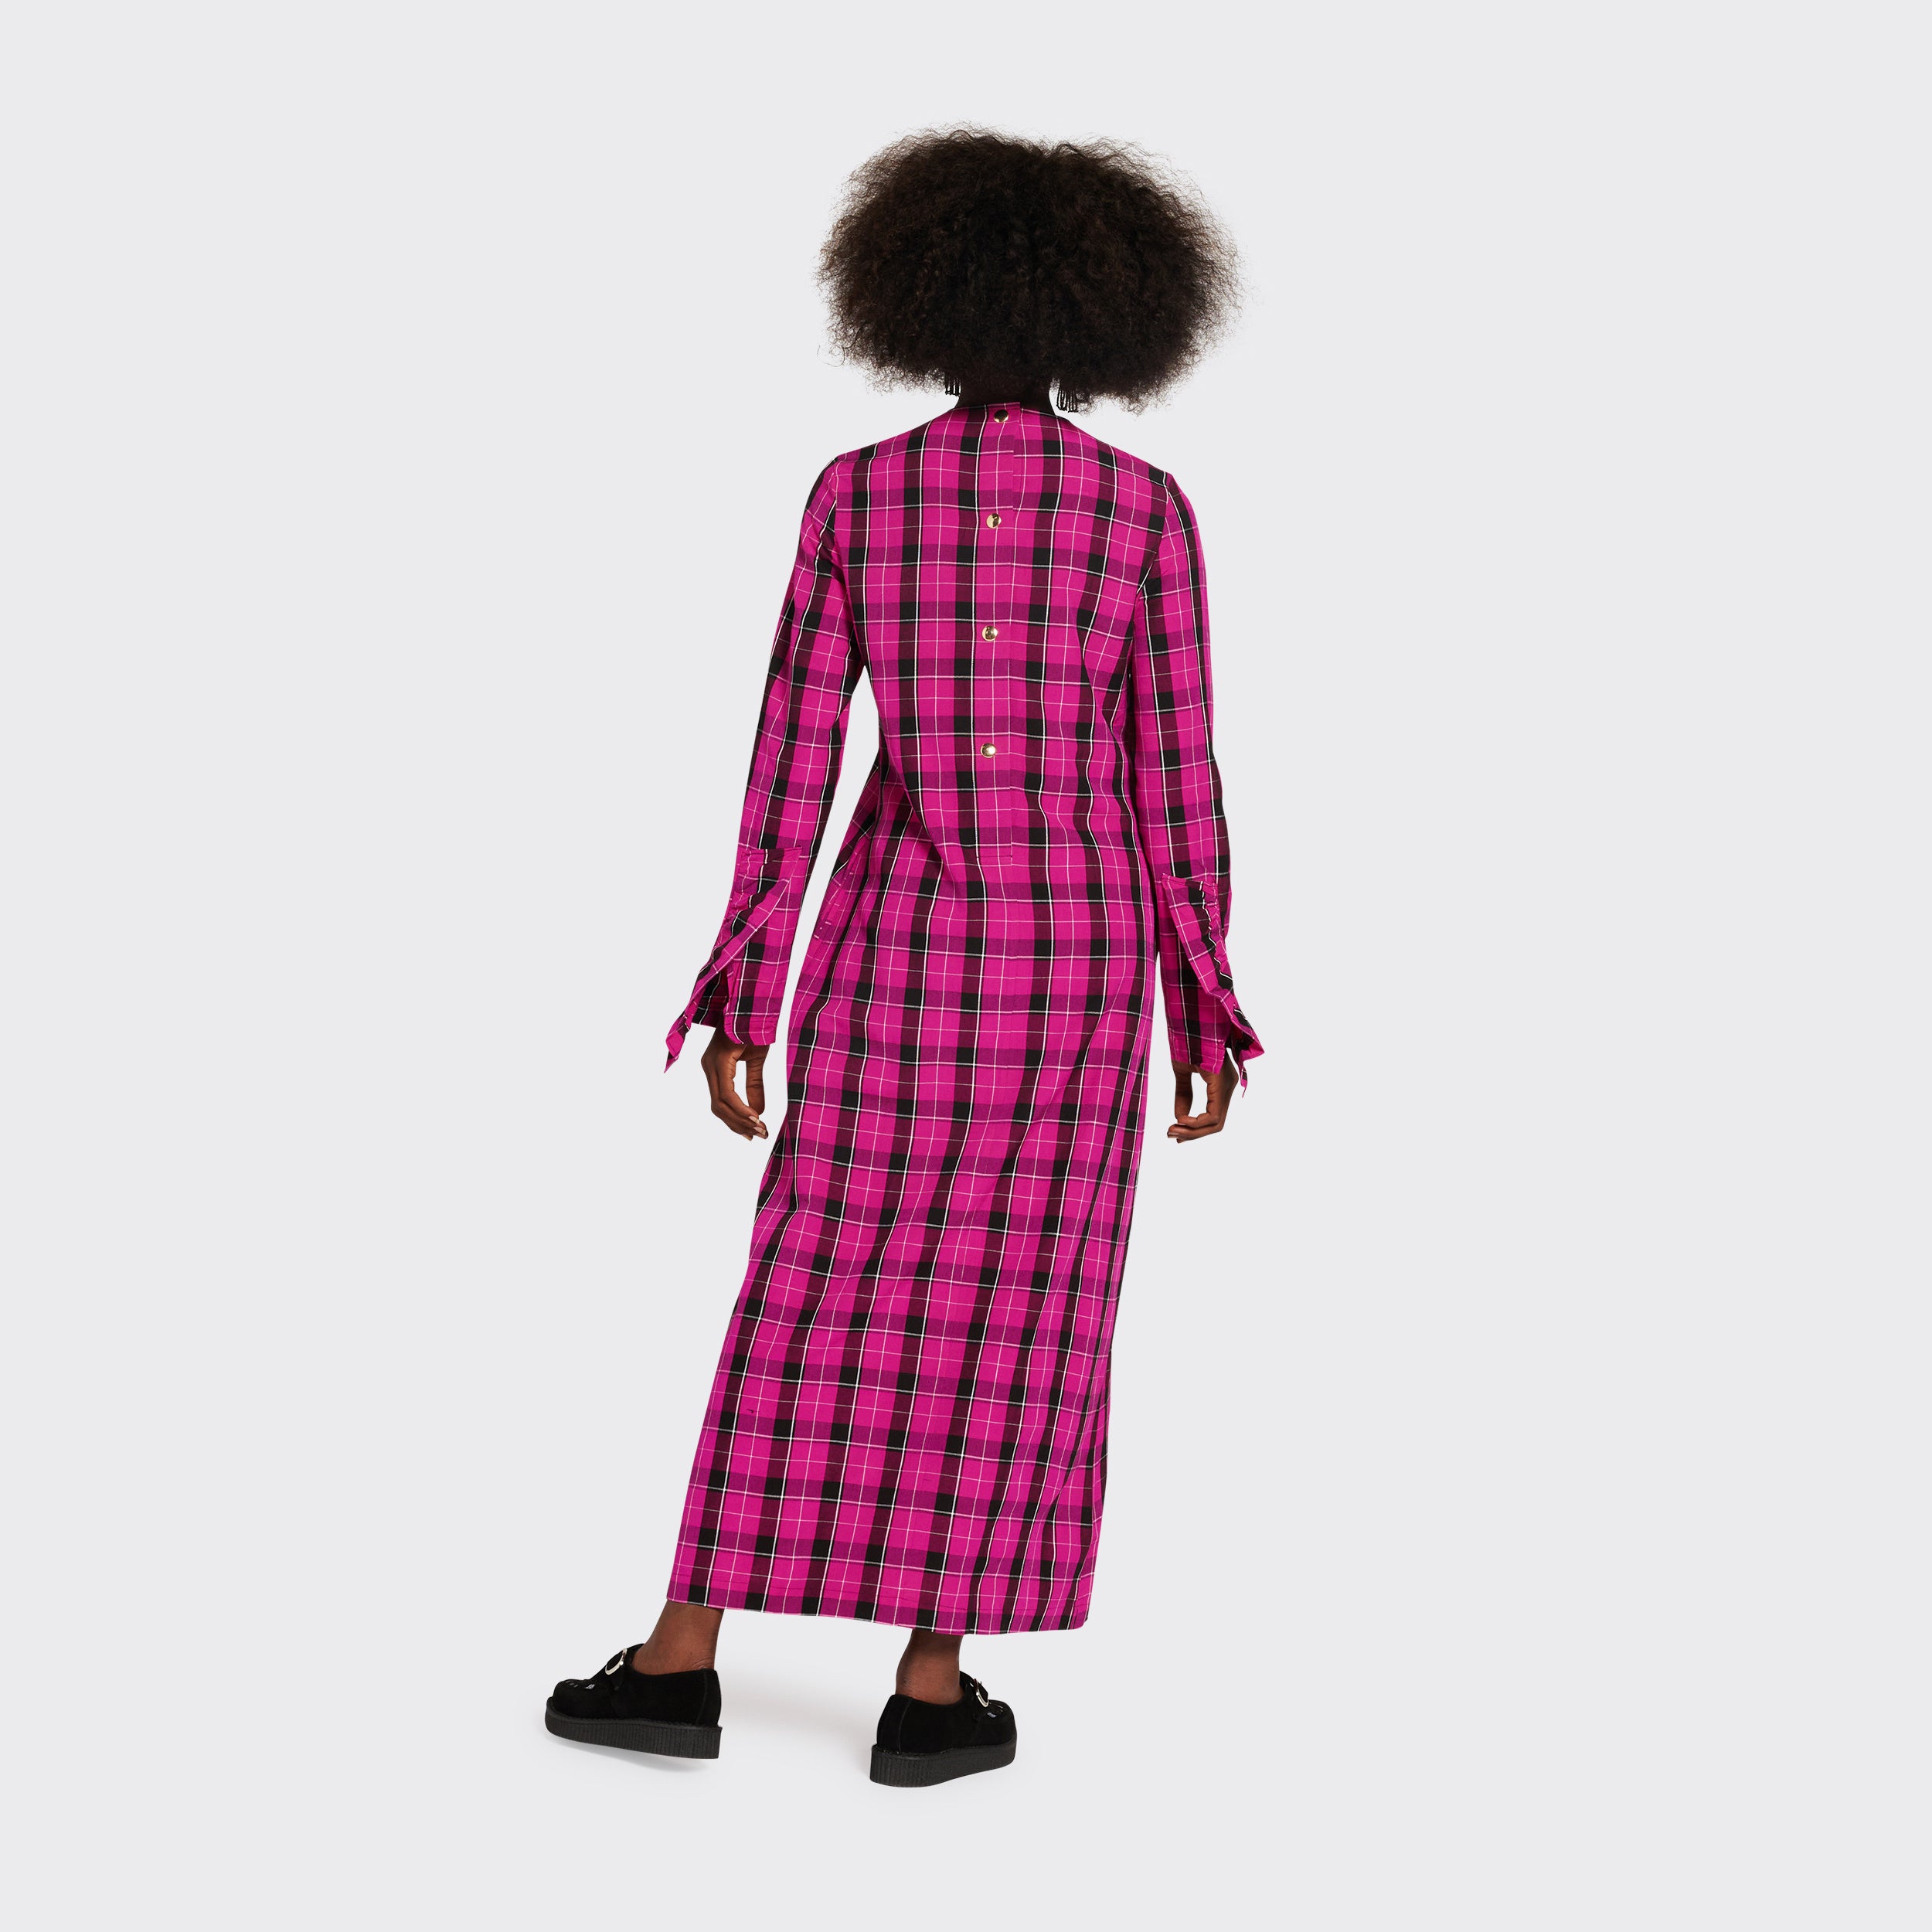 Long pink dress in Maasai fabric with black checks on model seen from the back